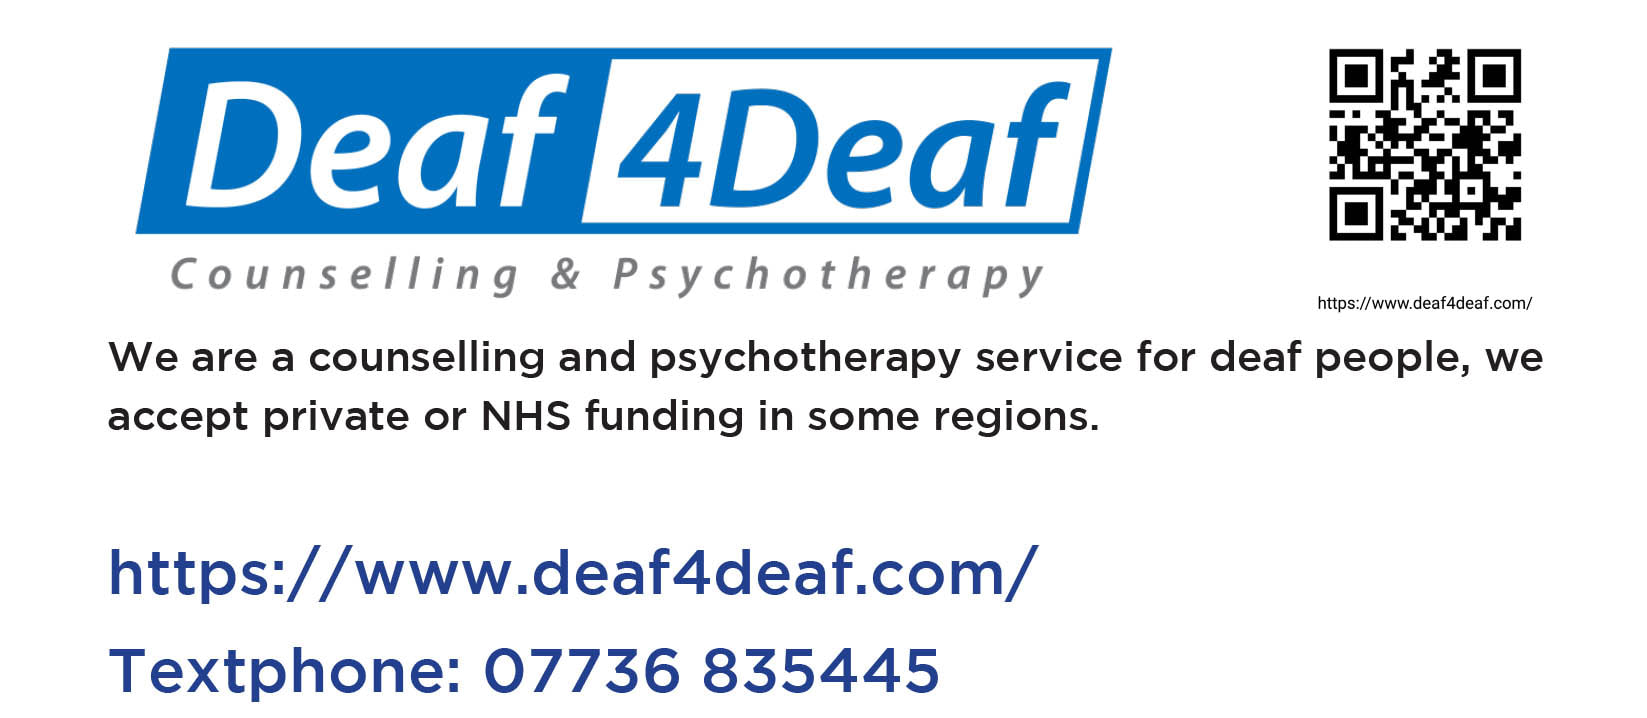 Banner linking to the Deaf 4 Deaf counselling service